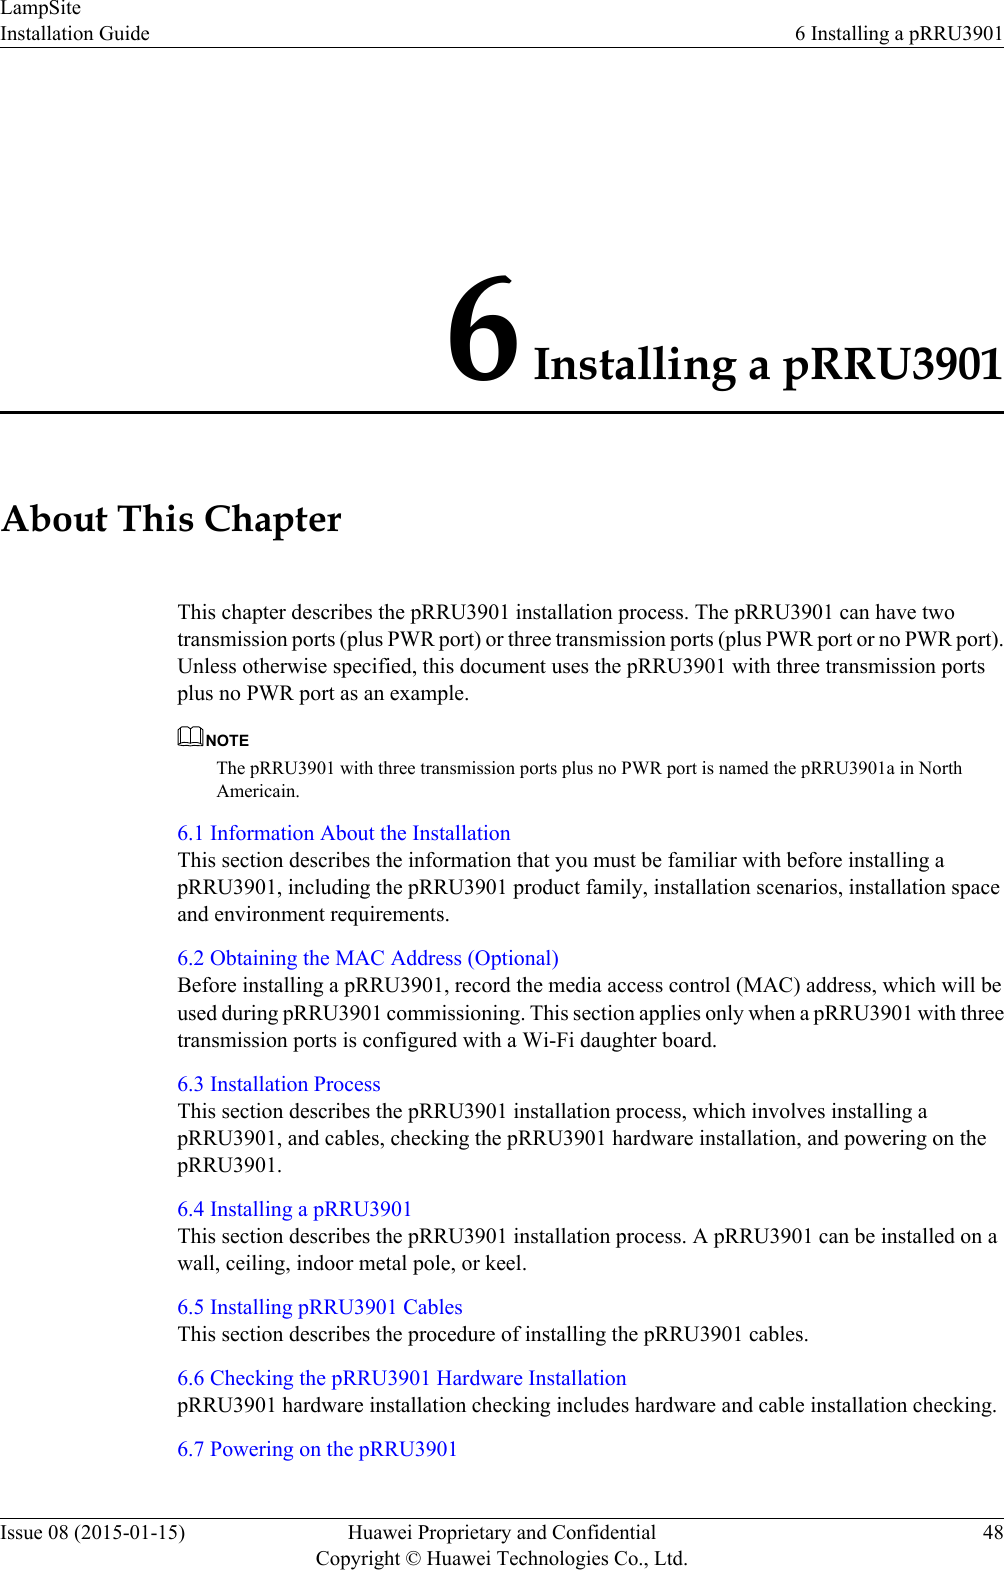 6 Installing a pRRU3901About This ChapterThis chapter describes the pRRU3901 installation process. The pRRU3901 can have twotransmission ports (plus PWR port) or three transmission ports (plus PWR port or no PWR port).Unless otherwise specified, this document uses the pRRU3901 with three transmission portsplus no PWR port as an example.NOTEThe pRRU3901 with three transmission ports plus no PWR port is named the pRRU3901a in NorthAmericain.6.1 Information About the InstallationThis section describes the information that you must be familiar with before installing apRRU3901, including the pRRU3901 product family, installation scenarios, installation spaceand environment requirements.6.2 Obtaining the MAC Address (Optional)Before installing a pRRU3901, record the media access control (MAC) address, which will beused during pRRU3901 commissioning. This section applies only when a pRRU3901 with threetransmission ports is configured with a Wi-Fi daughter board.6.3 Installation ProcessThis section describes the pRRU3901 installation process, which involves installing apRRU3901, and cables, checking the pRRU3901 hardware installation, and powering on thepRRU3901.6.4 Installing a pRRU3901This section describes the pRRU3901 installation process. A pRRU3901 can be installed on awall, ceiling, indoor metal pole, or keel.6.5 Installing pRRU3901 CablesThis section describes the procedure of installing the pRRU3901 cables.6.6 Checking the pRRU3901 Hardware InstallationpRRU3901 hardware installation checking includes hardware and cable installation checking.6.7 Powering on the pRRU3901LampSiteInstallation Guide 6 Installing a pRRU3901Issue 08 (2015-01-15) Huawei Proprietary and ConfidentialCopyright © Huawei Technologies Co., Ltd.48